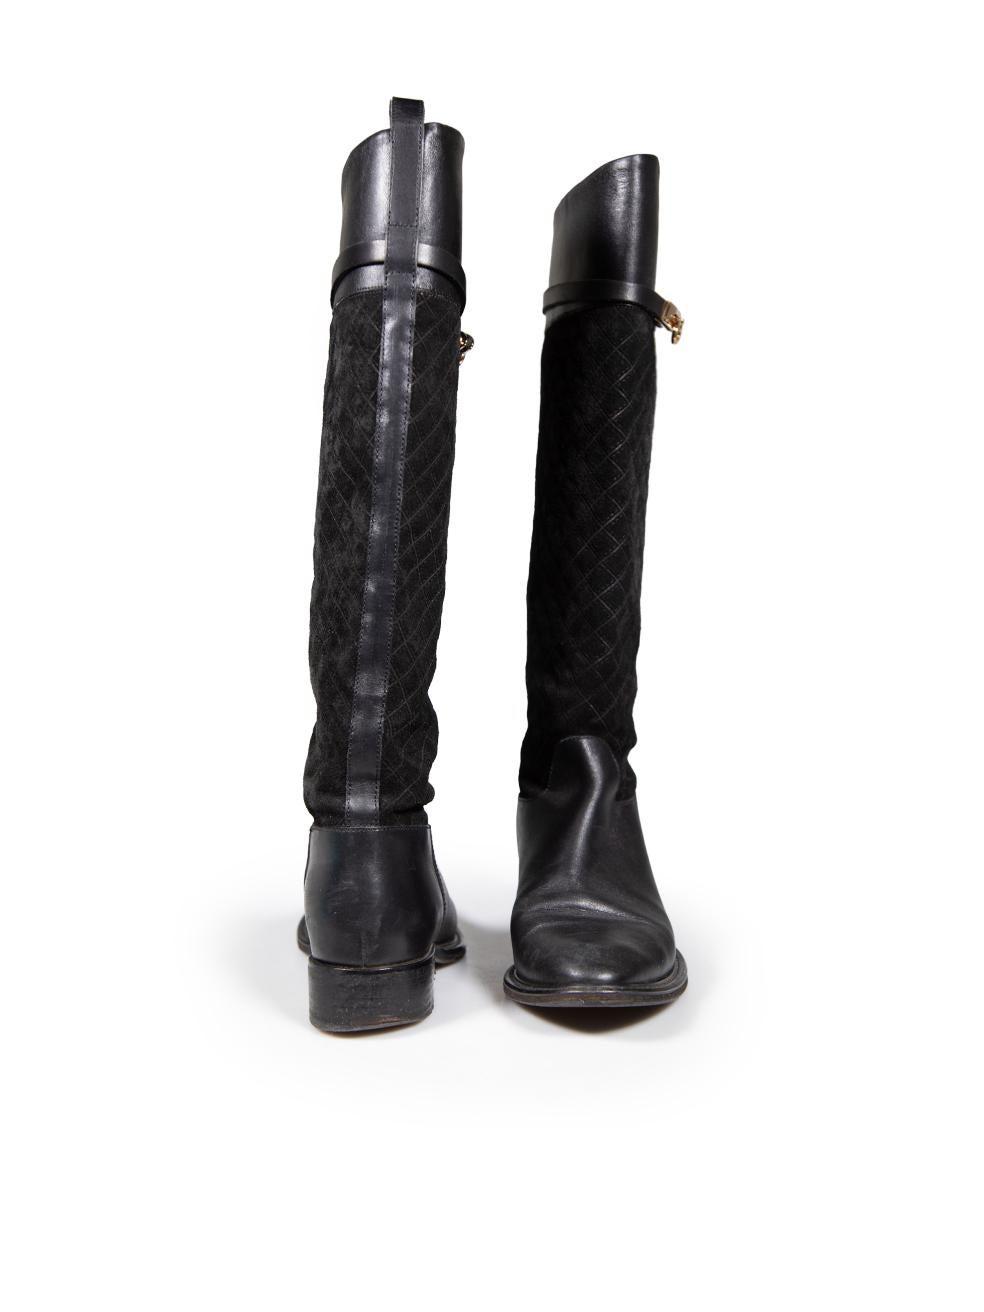 Salvatore Ferragamo Black Leather Riding Boots Size US 5 In Good Condition For Sale In London, GB